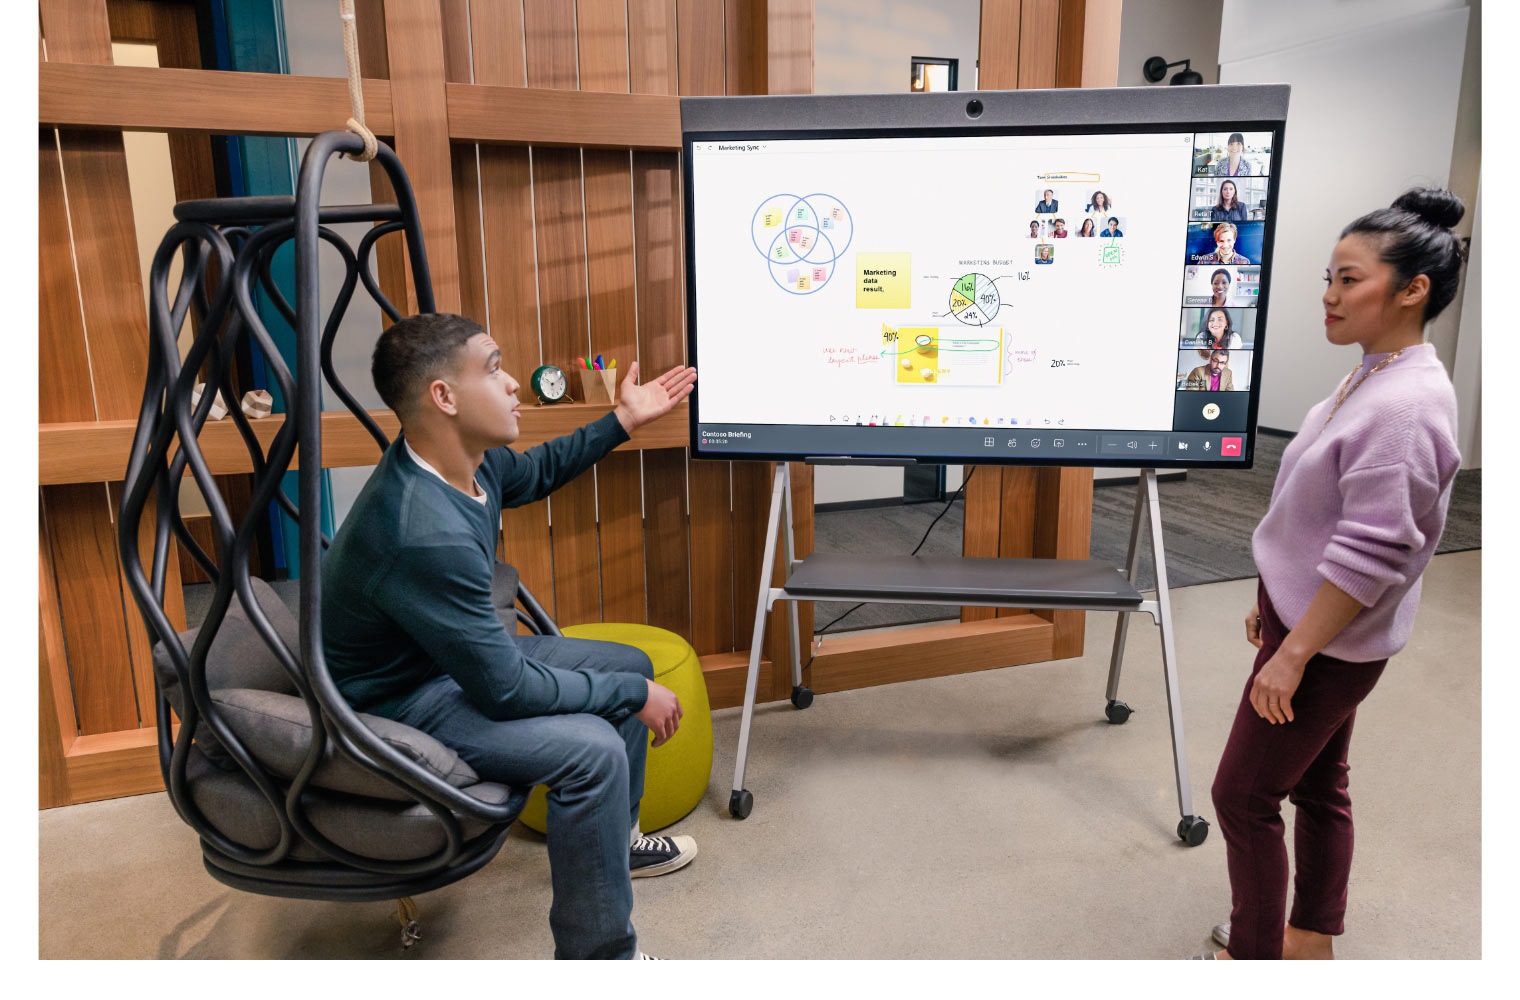 A person sitting in an egg-shaped chair having a conversation with a coworker while participating in a Teams meeting being displayed on a large screen next to them where a collaborative whiteboard is being edited in real time.